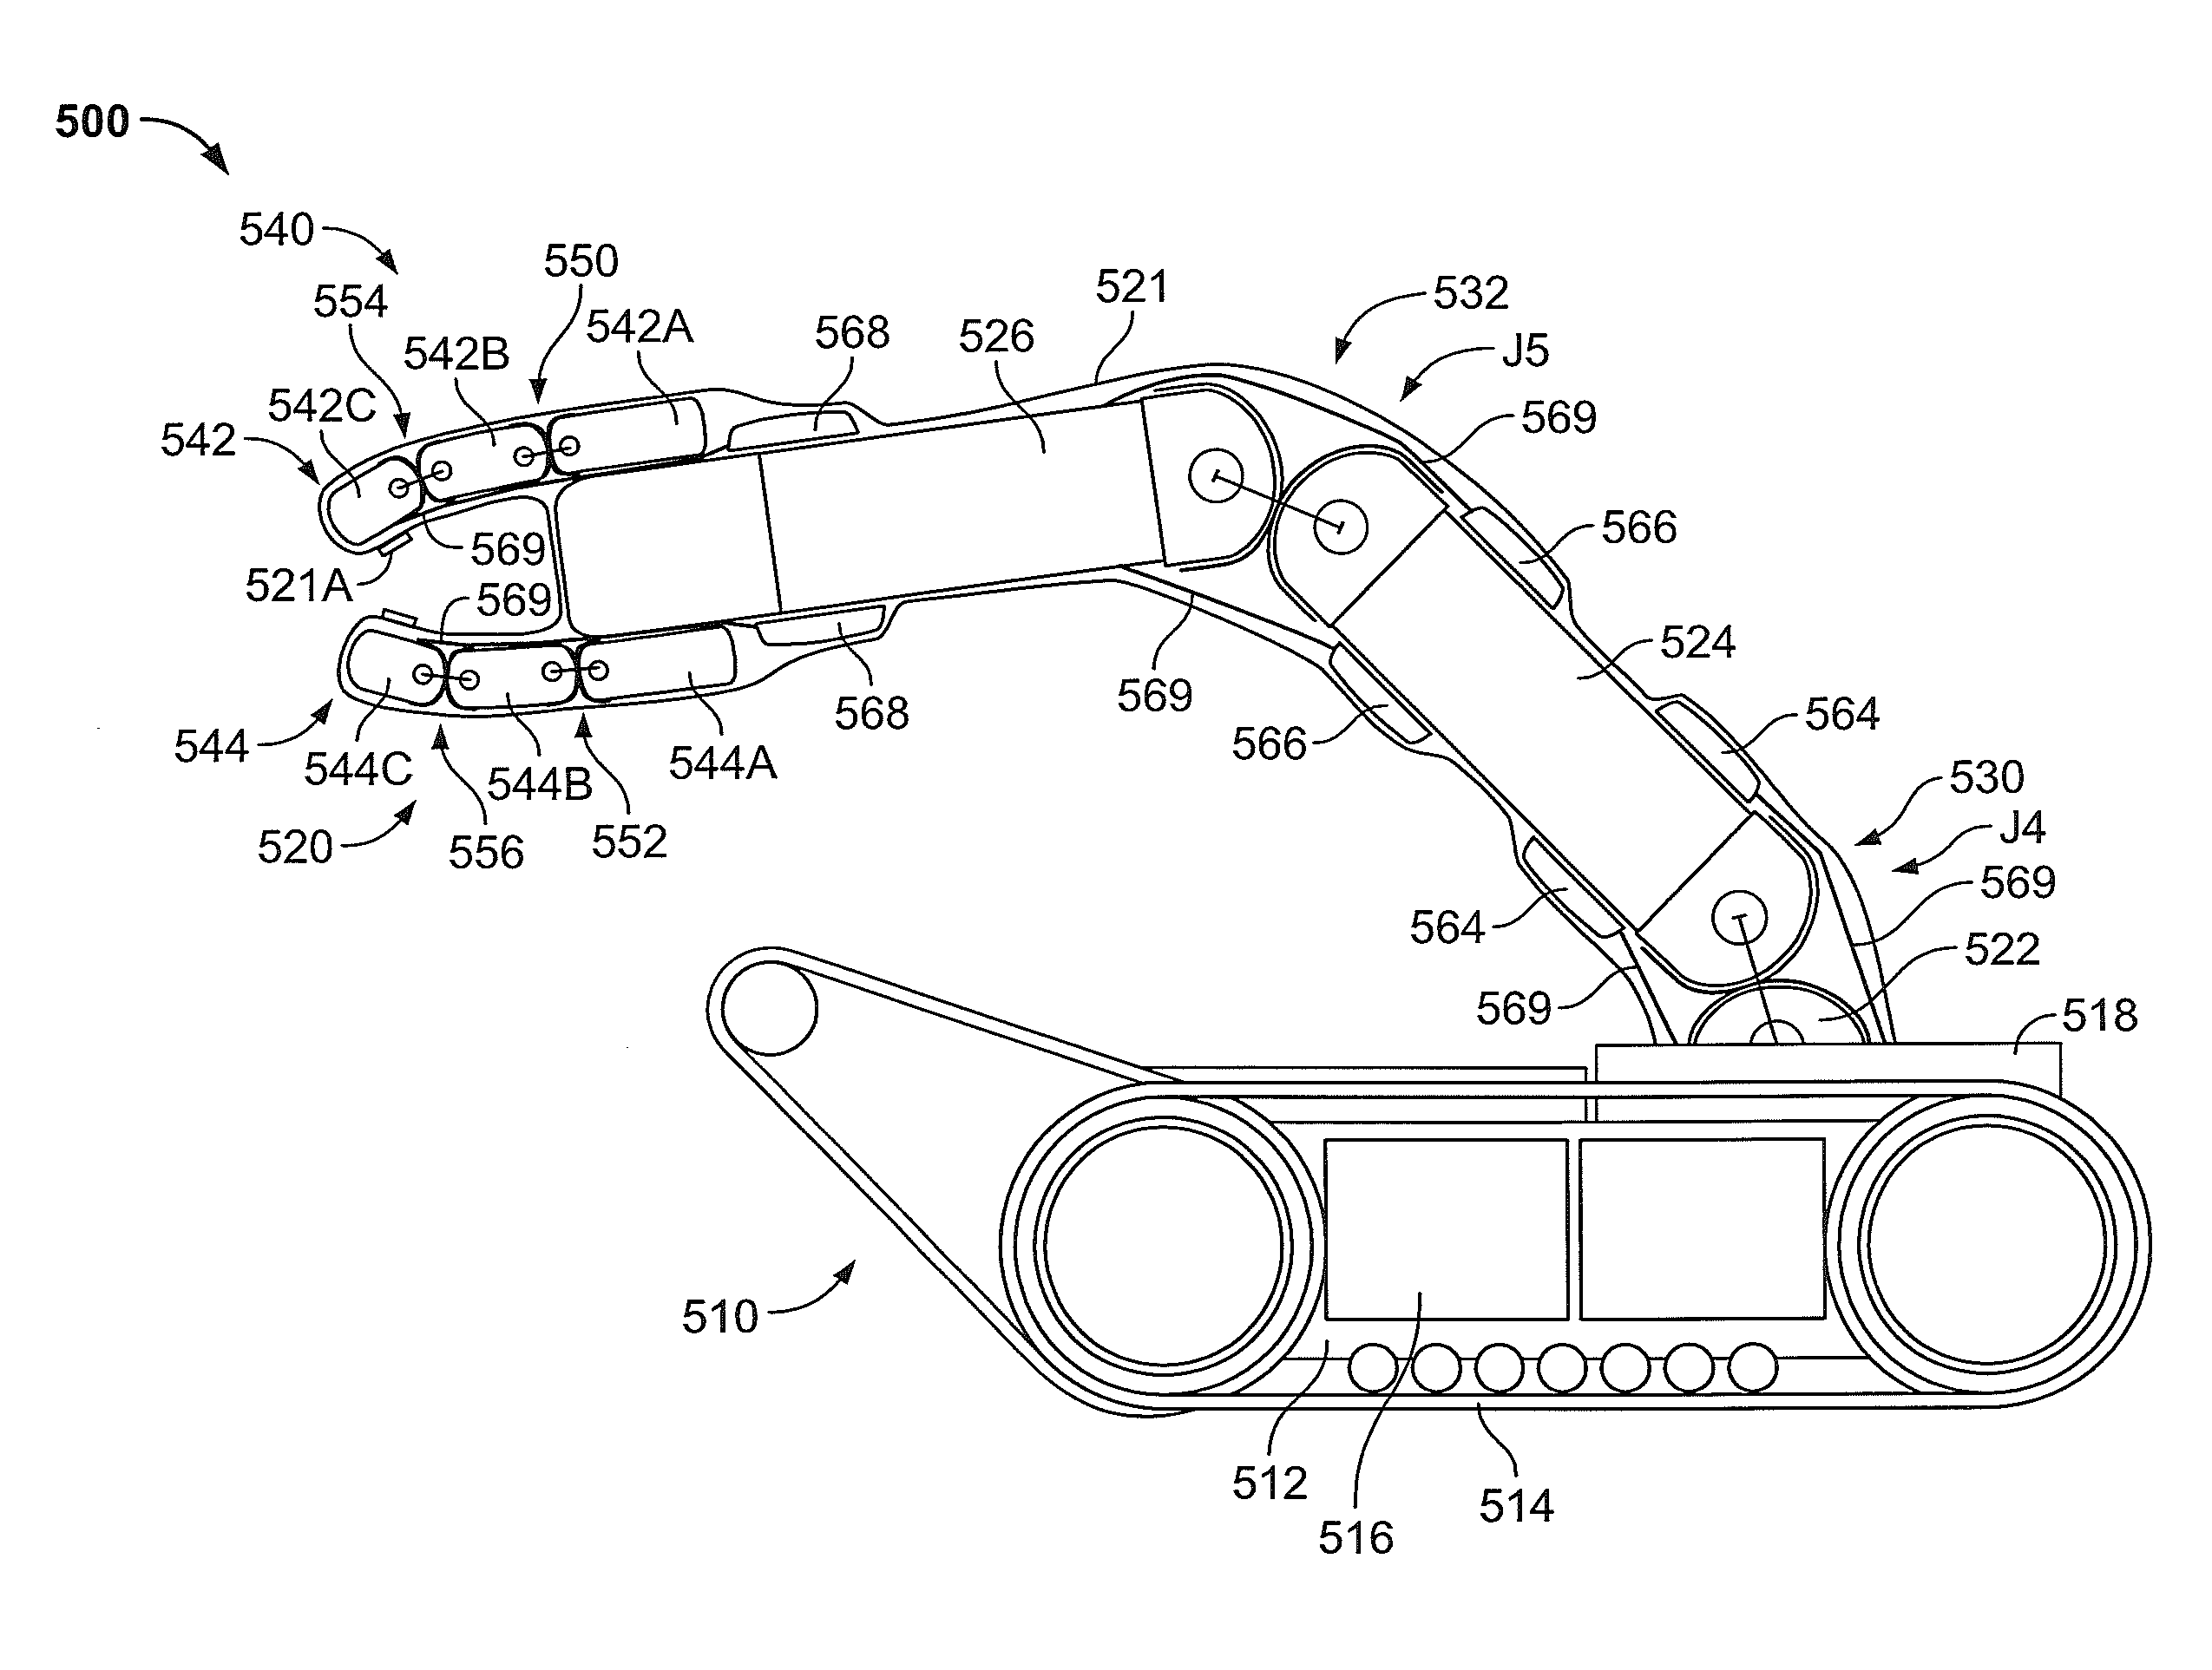 Inflatable robots, robotic components and assemblies and methods including same